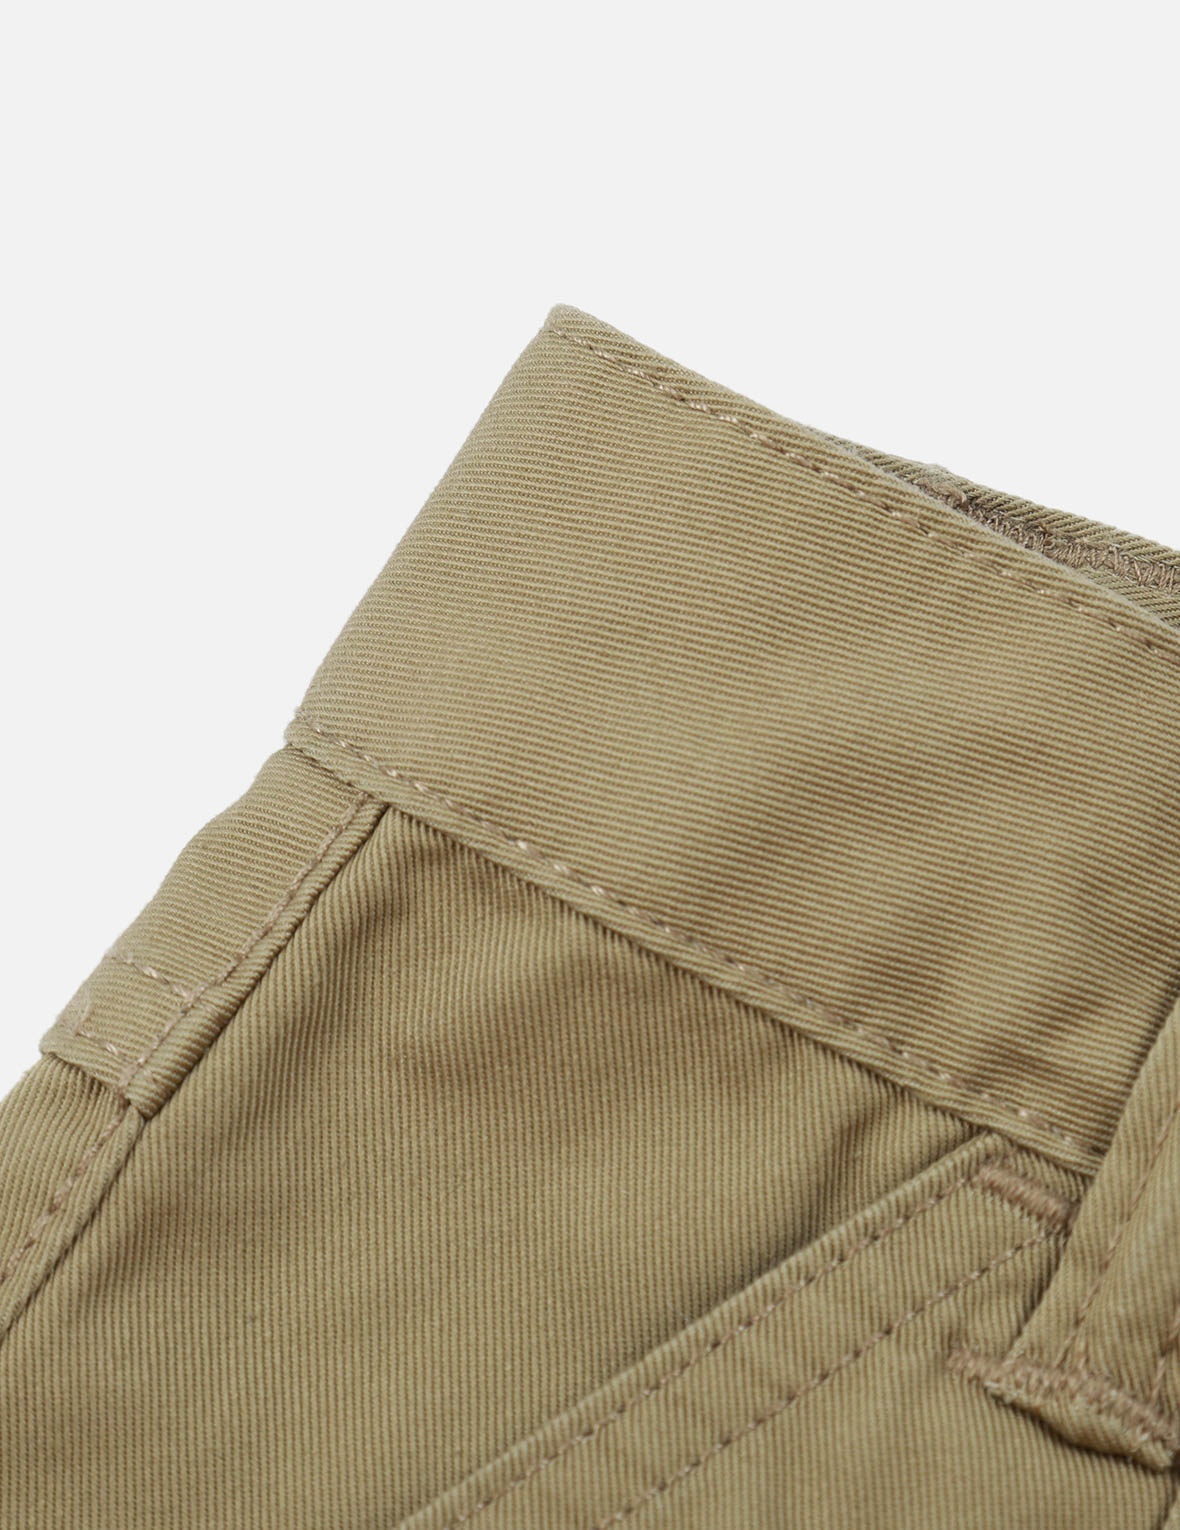 SEAGULL AND LOGO EMBROIDERY CARGO SHORTS - 9